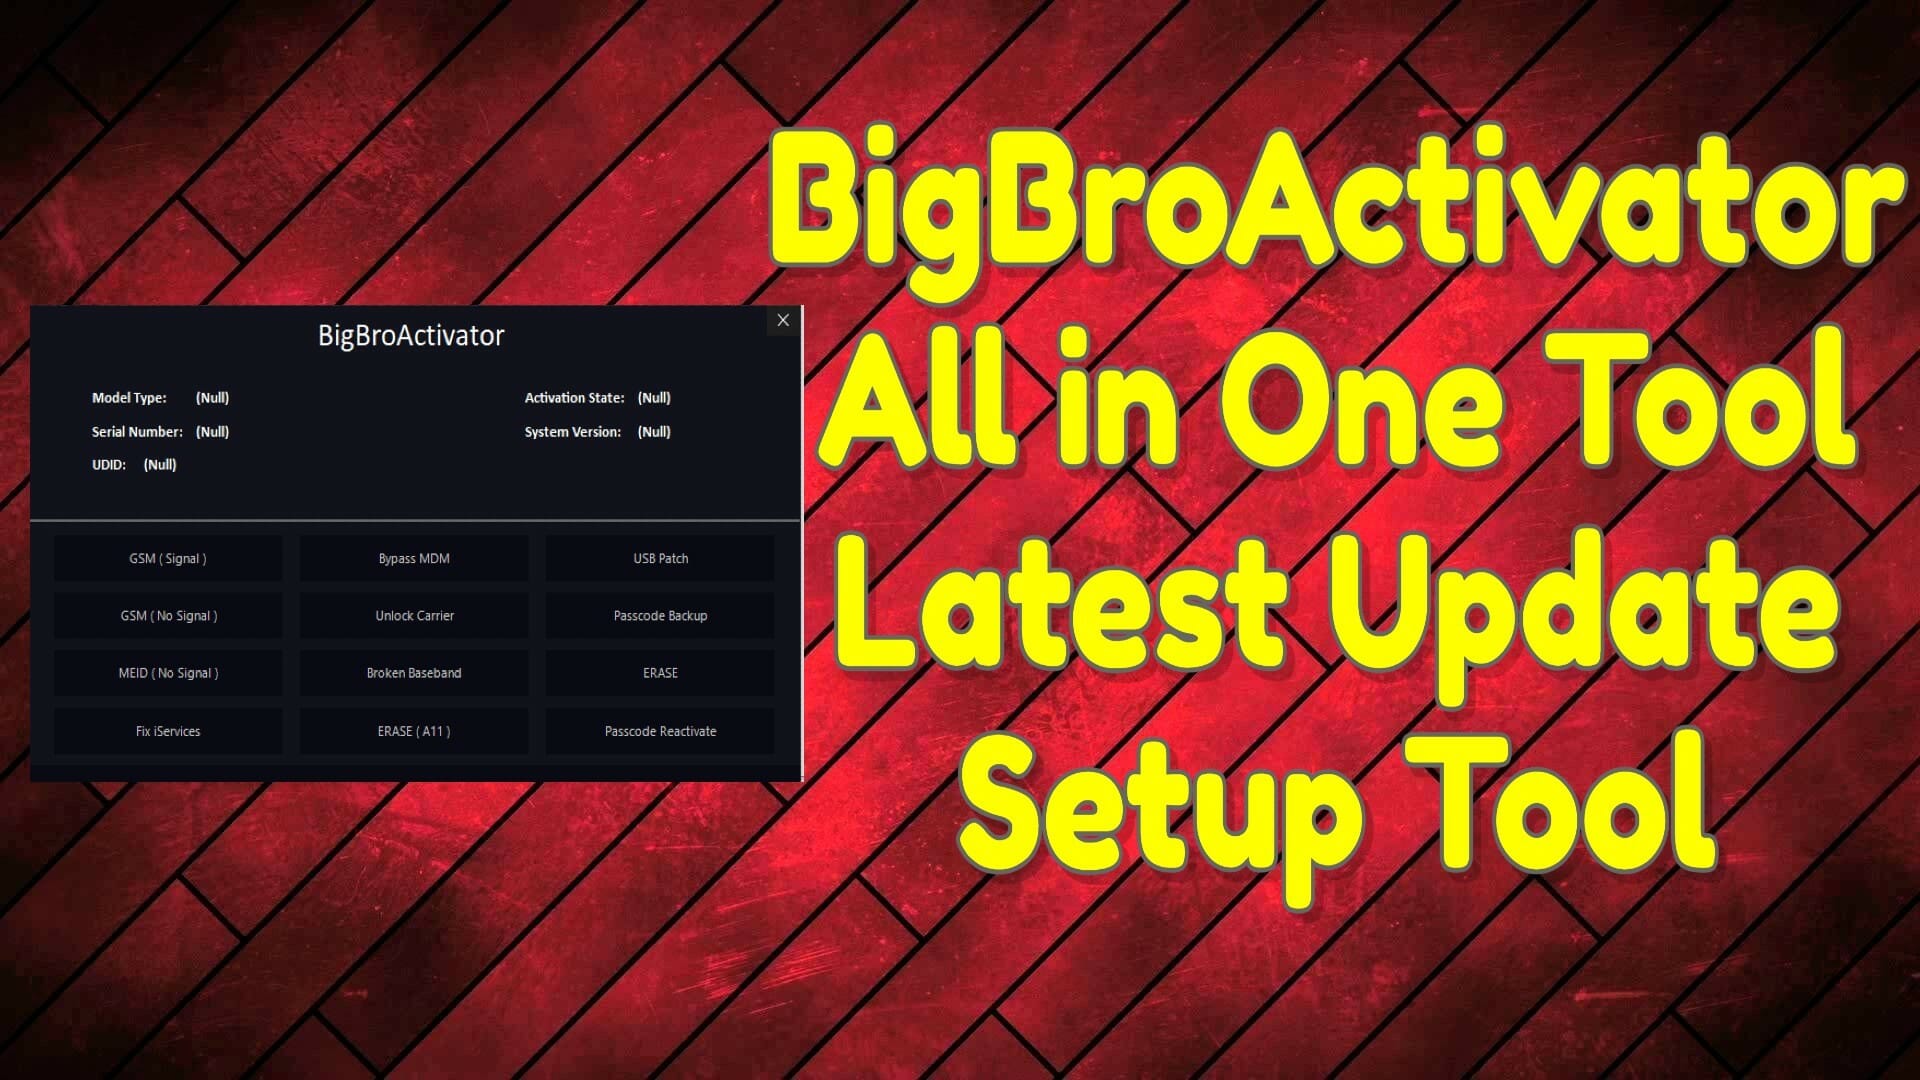 BigBroActivator All-in-One Tool Latest Update Setup Free Download